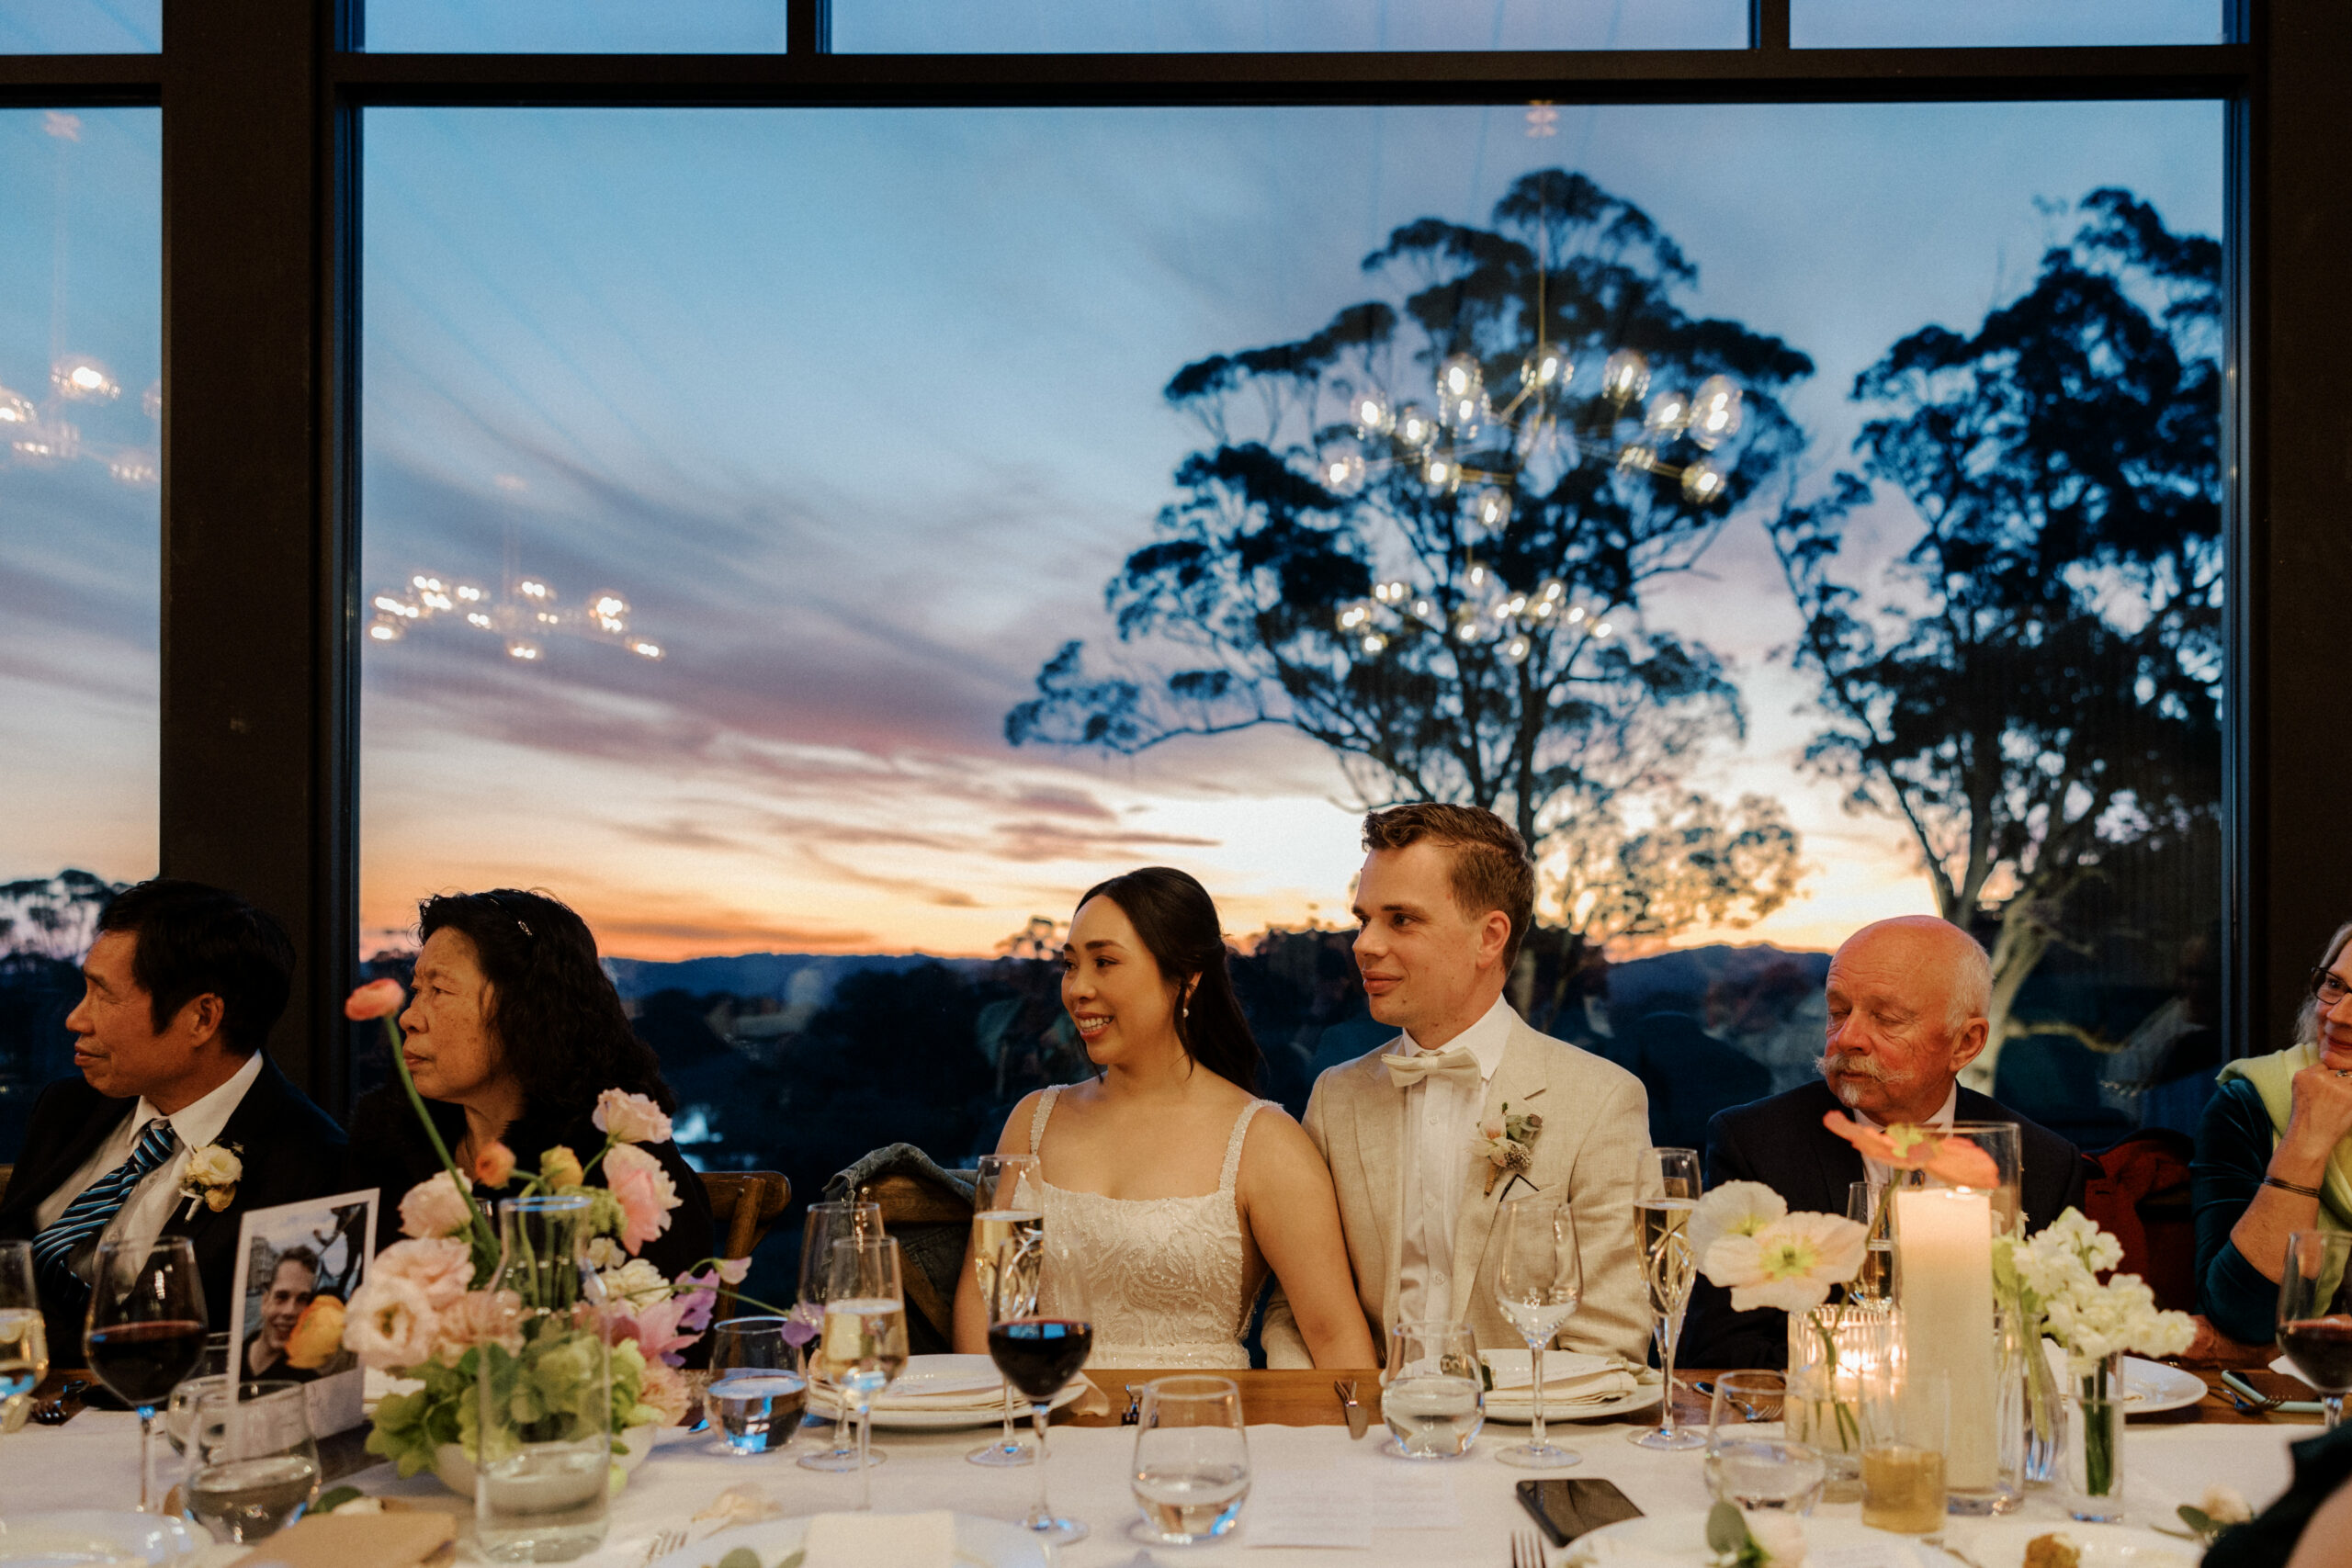 A bride and groom seated at a wedding reception table, looking out towards a large window that frames a stunning sunset, with guests and elegant table settings in the foreground